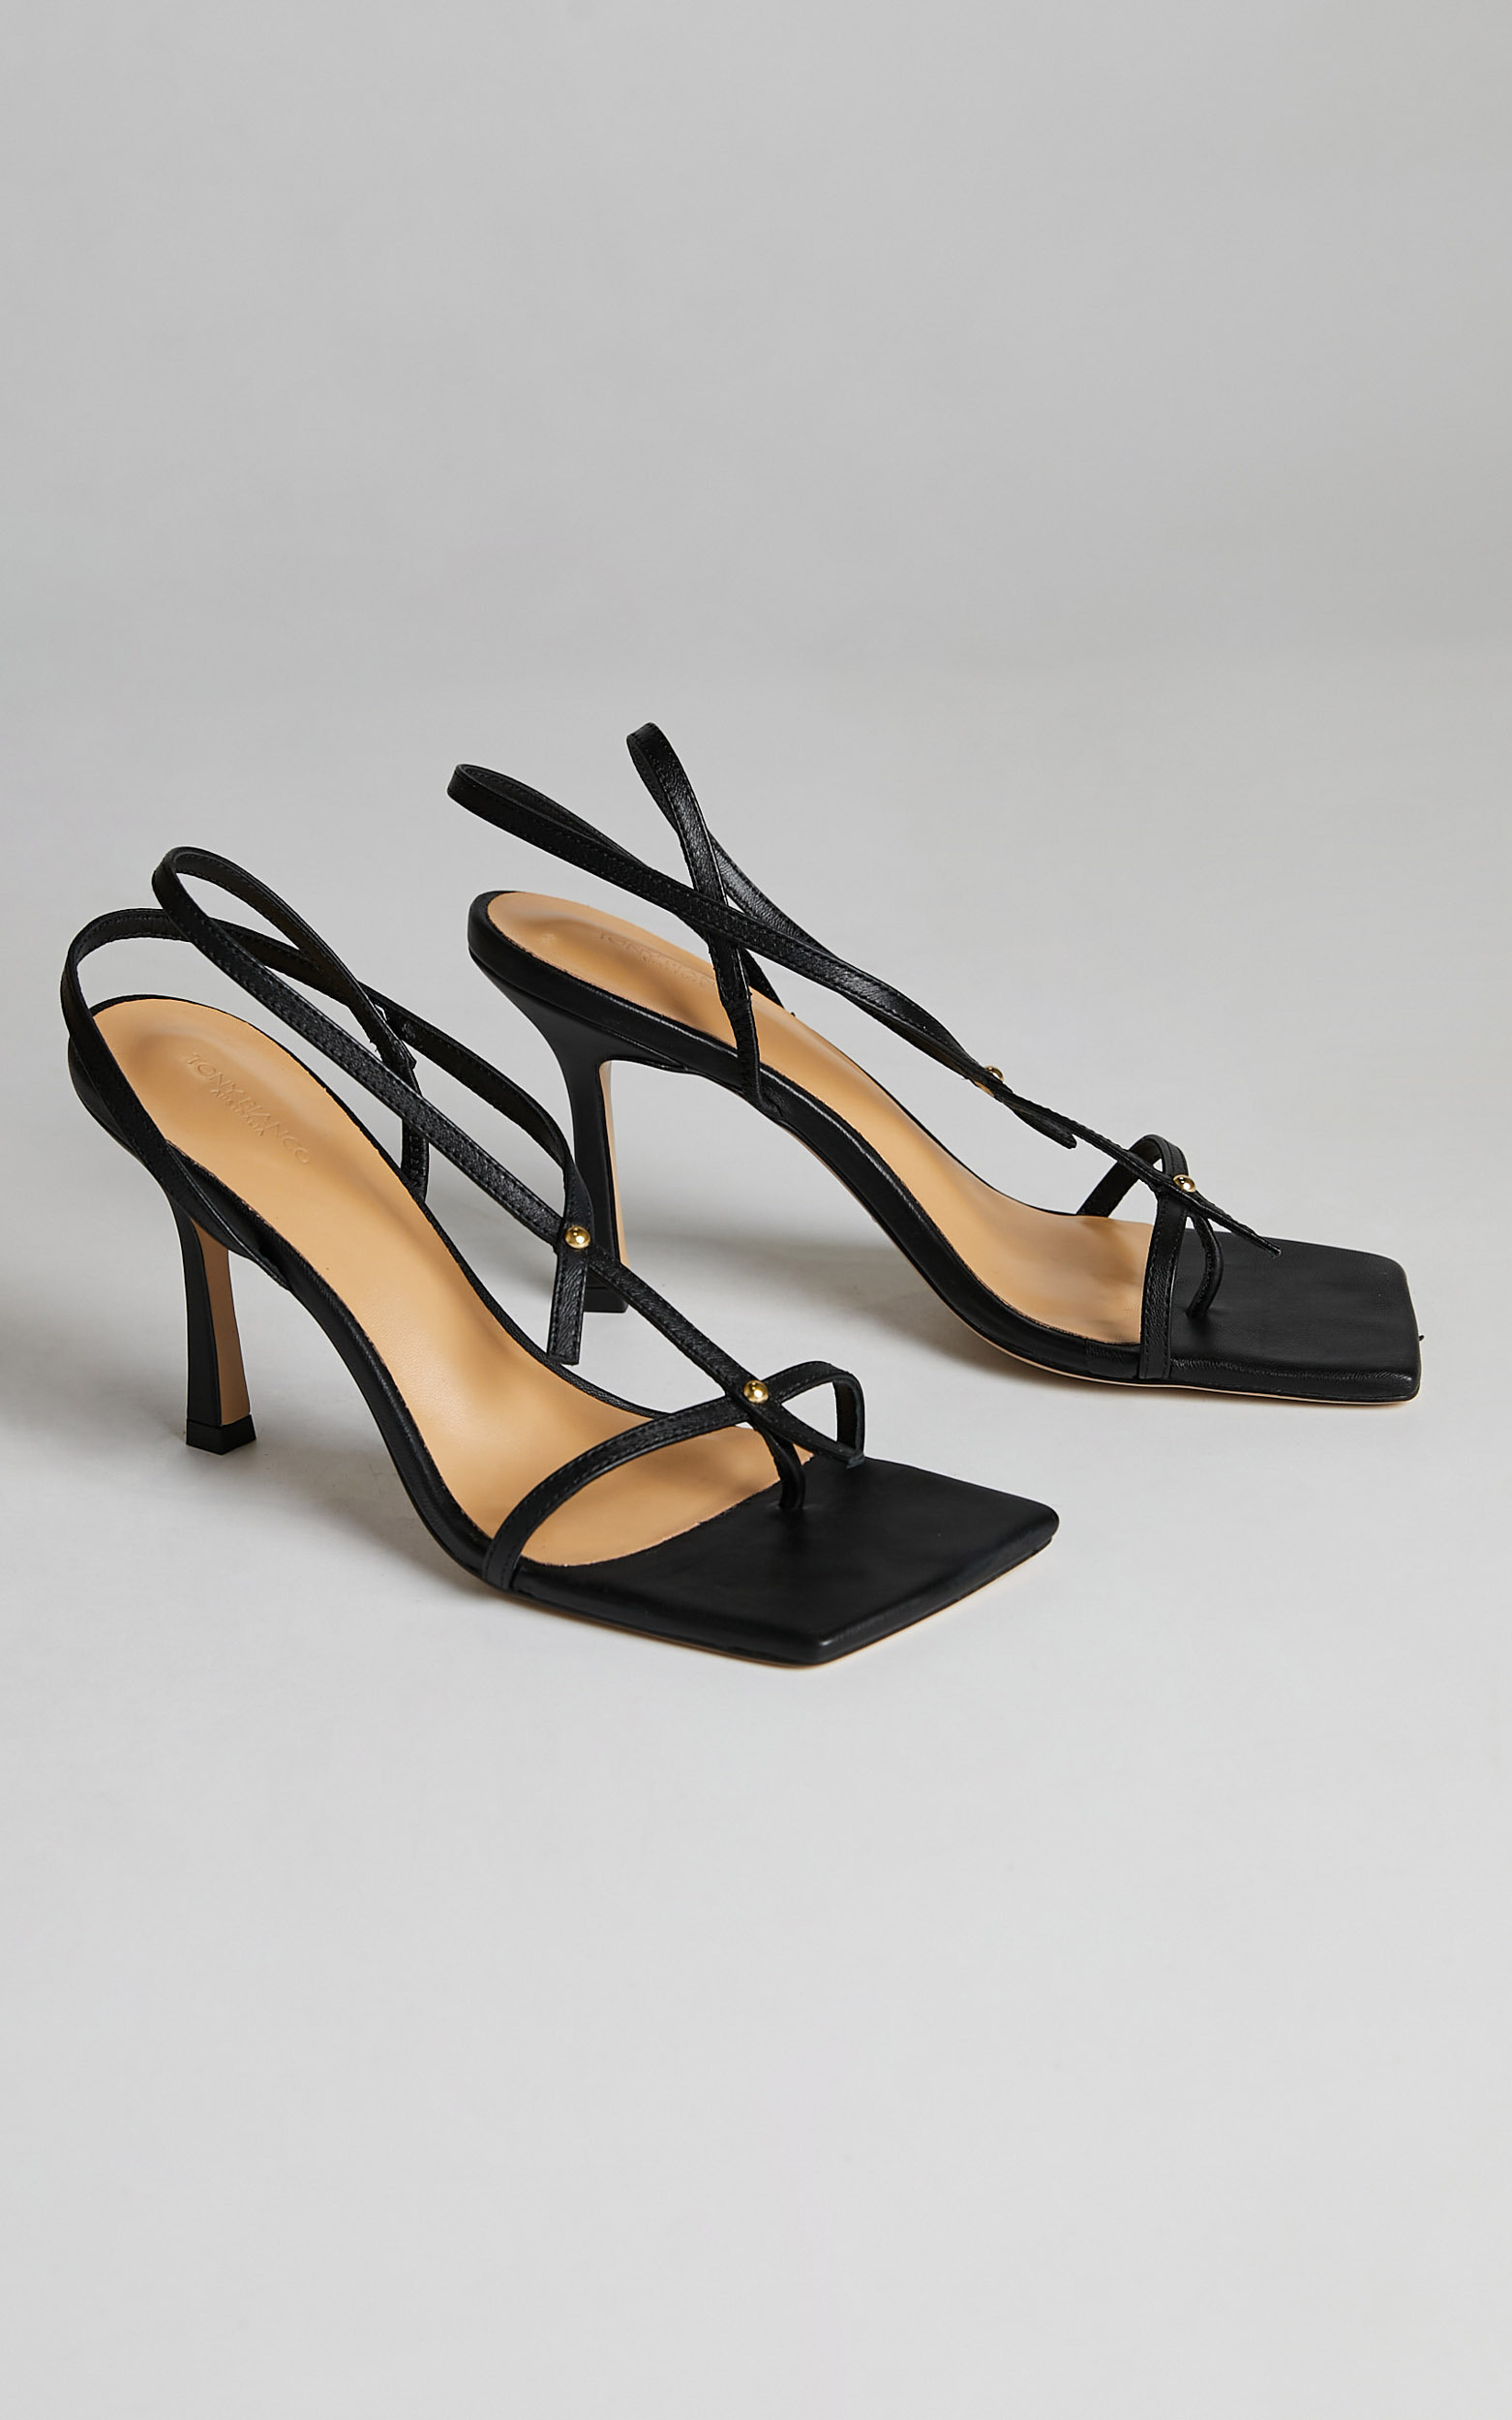 TONY BIANCO - LILLY Heels in BLACK NAPPA - 05, BLK1, hi-res image number null